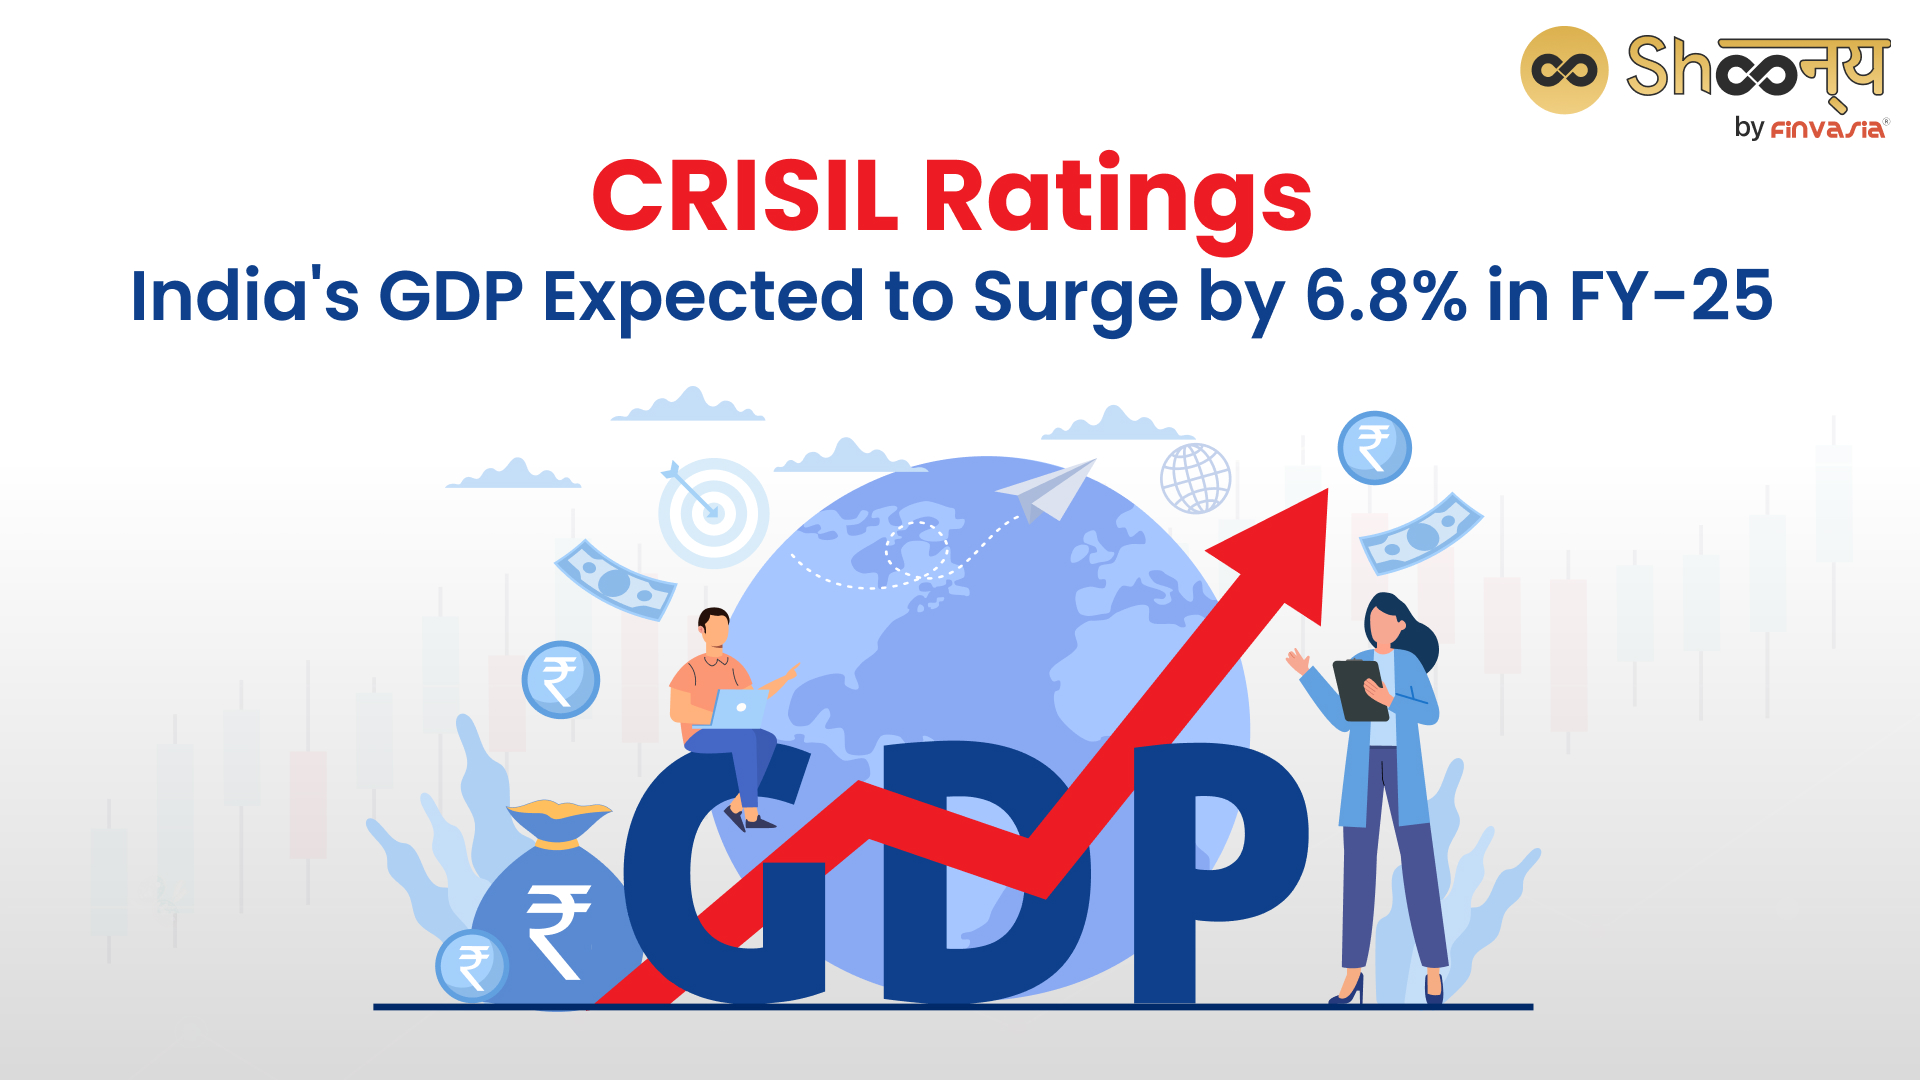 CRISIL Ratings Forecasts India's GDP Growth at 6.8% for FY'25